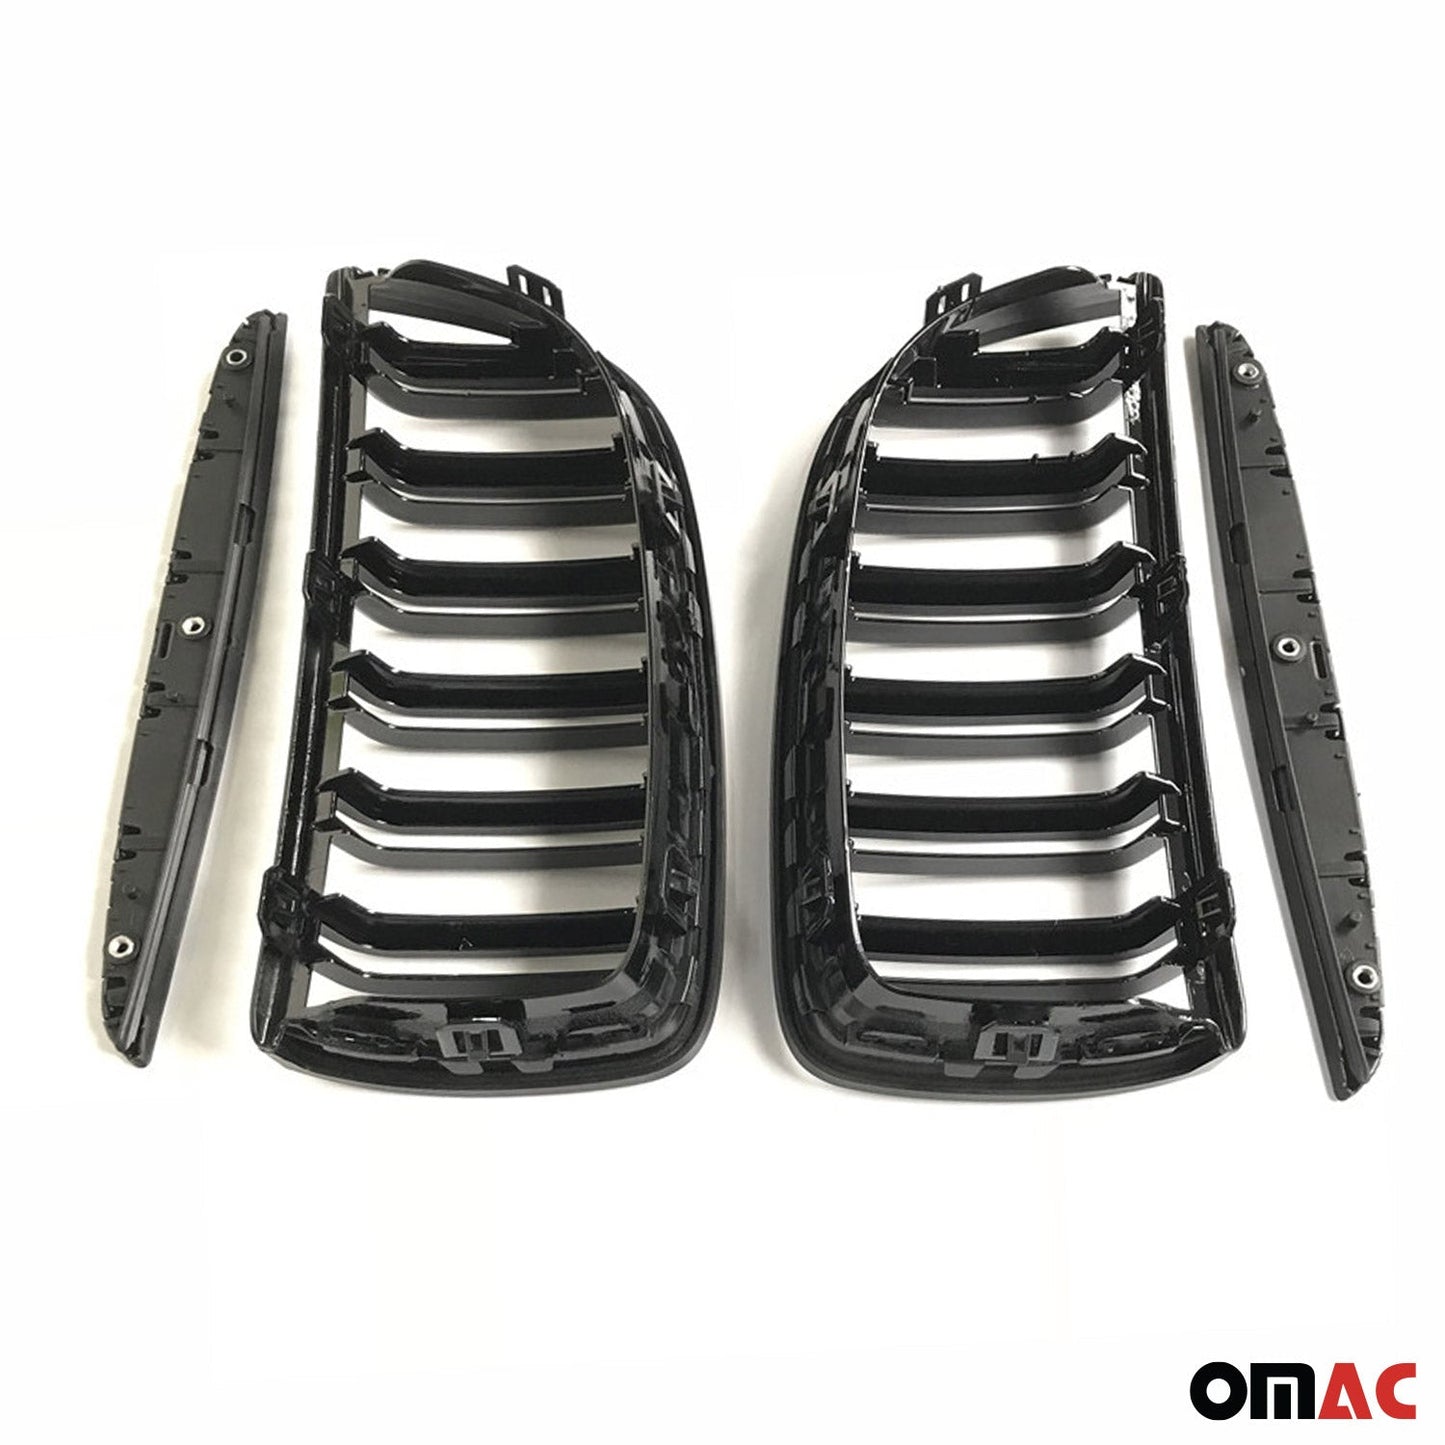 OMAC For BMW E90 E91 2005-2008 Front Kidney Grille M4 Style Gloss Black Dual Slat 1203P083M